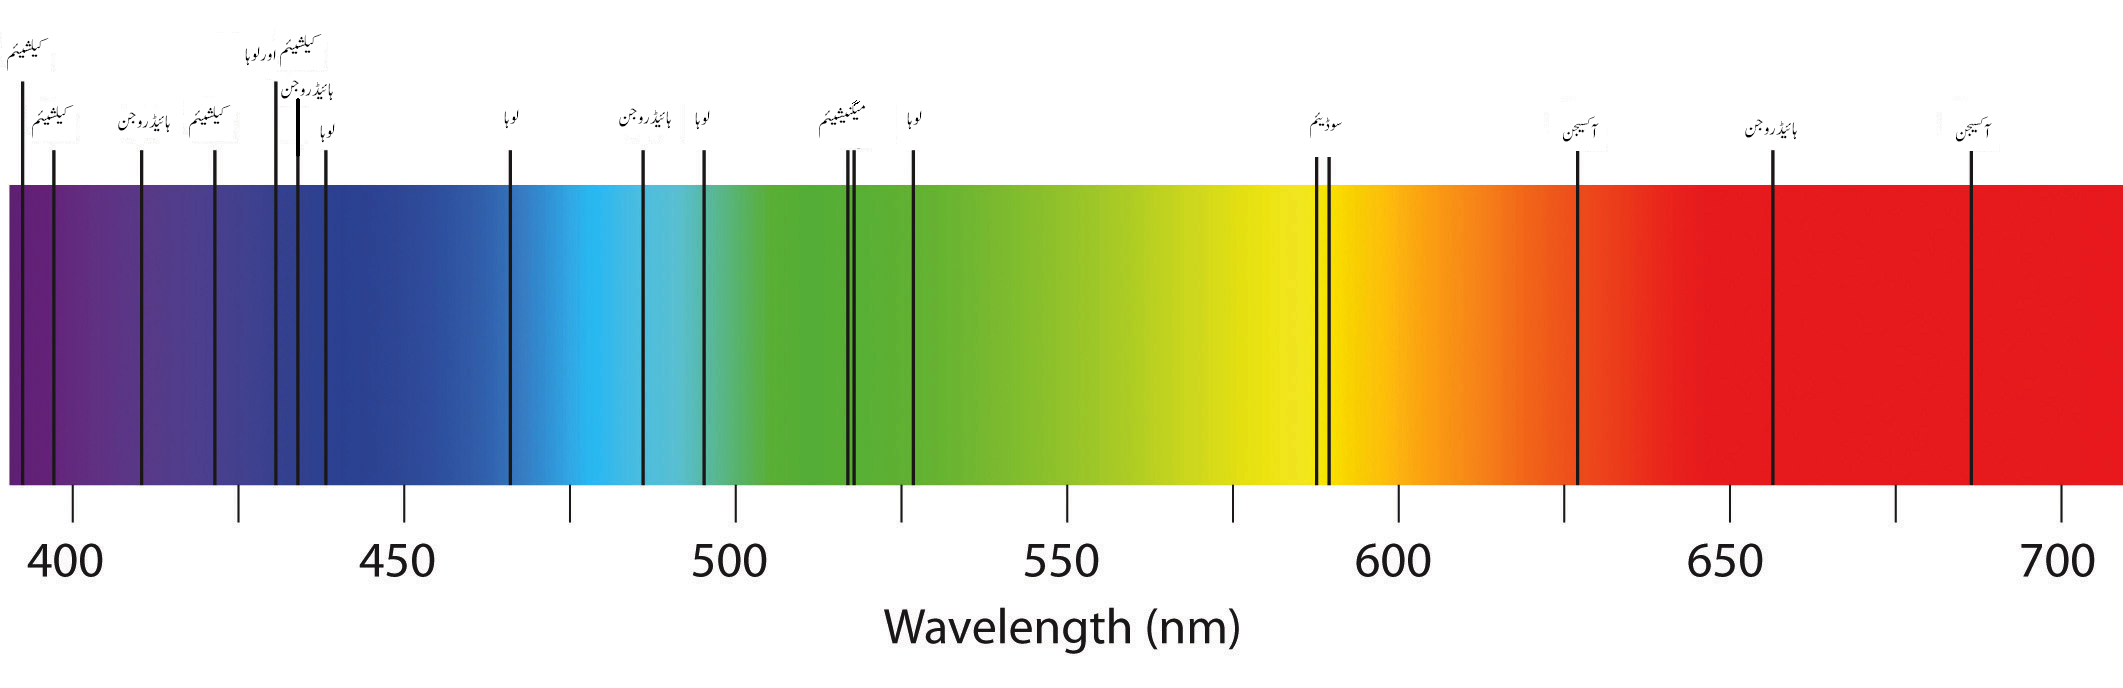 The absorption spectrum of a few elements. https://commons.wikimedia.org/wiki/File:Absorption_spectrum_of_few_elements.PNG